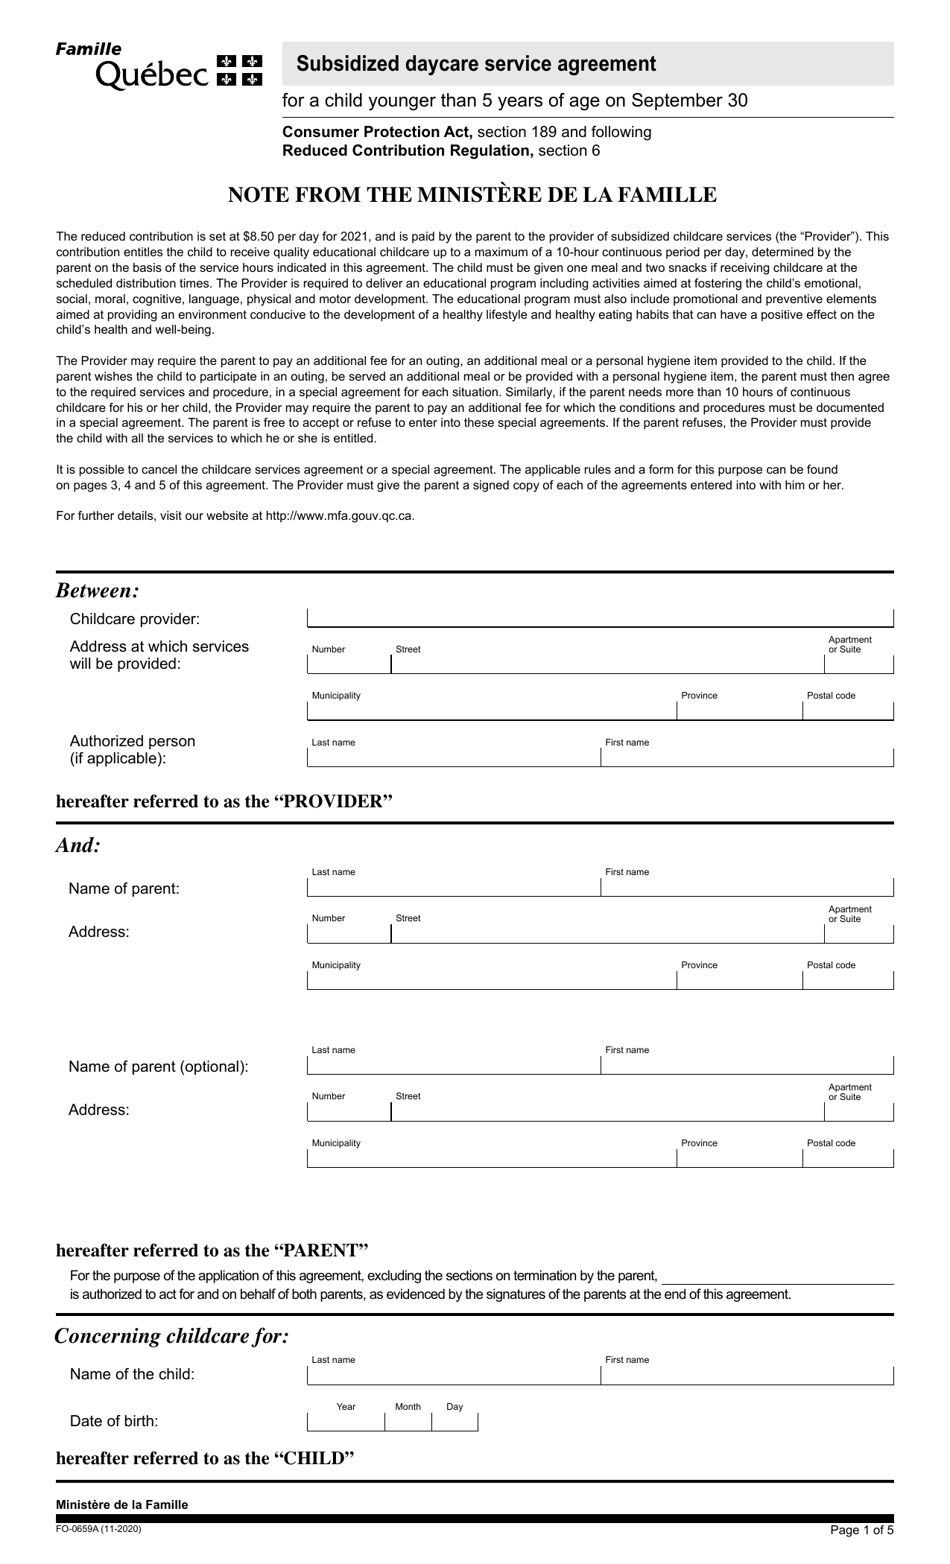 Form FO-0659A Subsidized Daycare Service Agreement - Quebec, Canada, Page 1